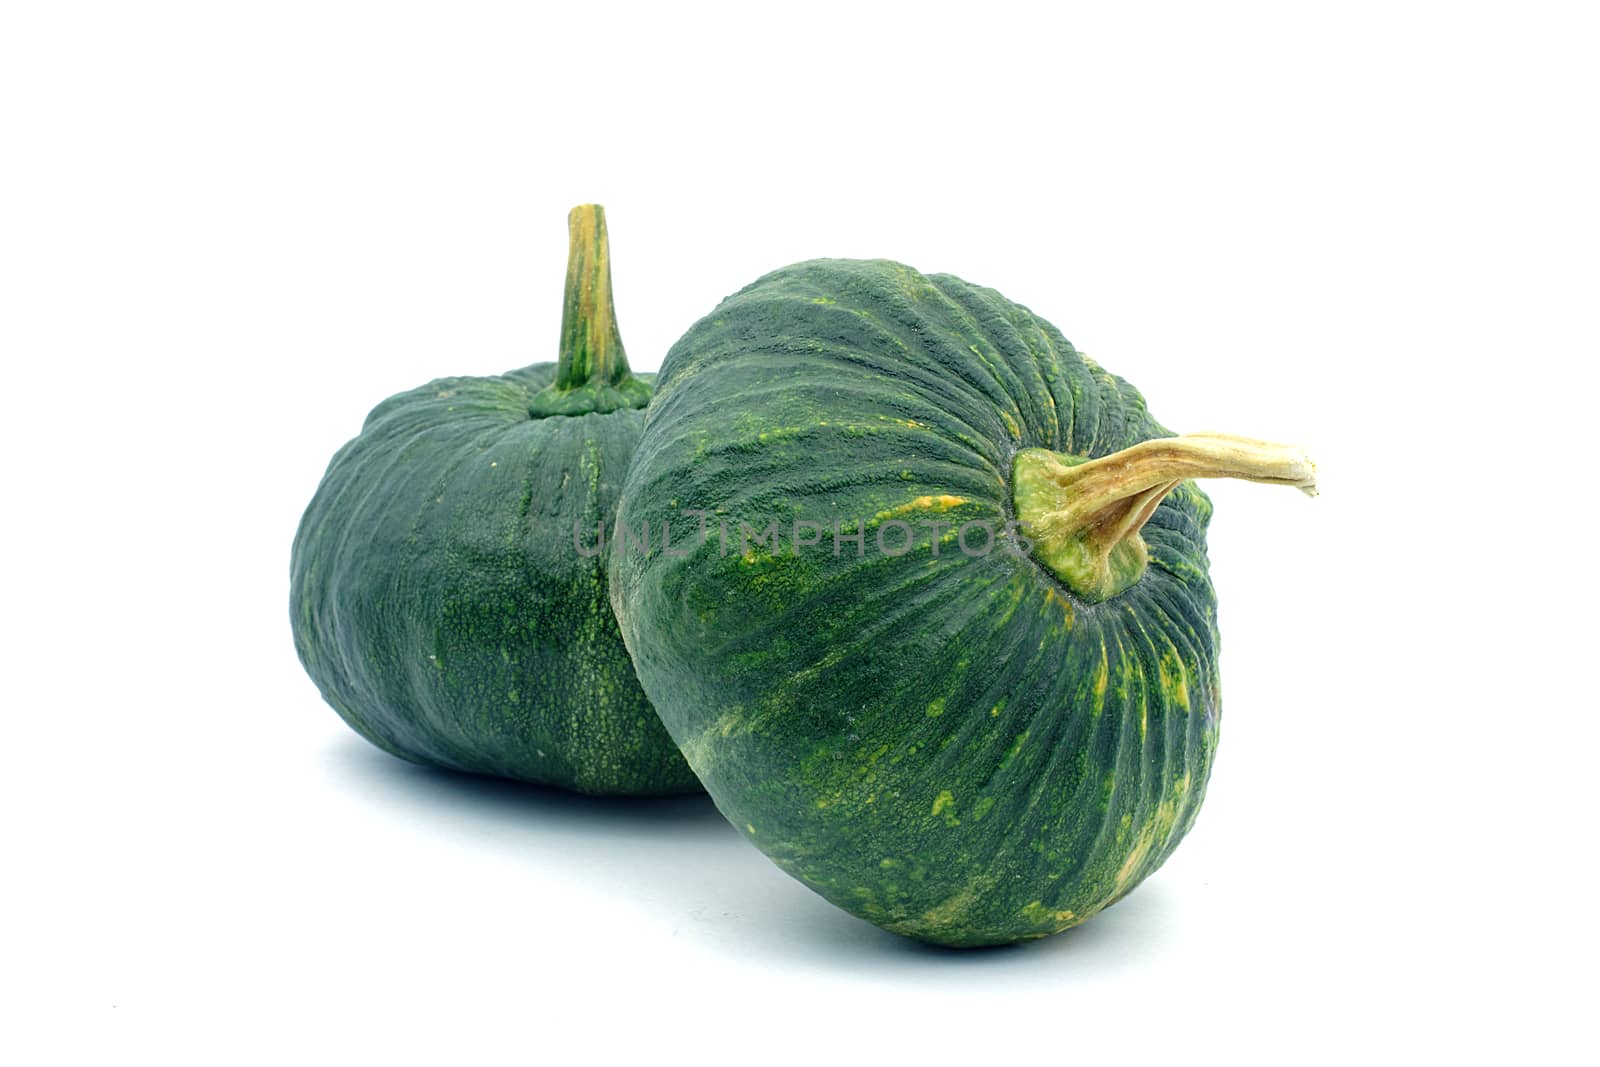 Double green pumpkin on white background. Two small green pumpkin on white background. object side view.